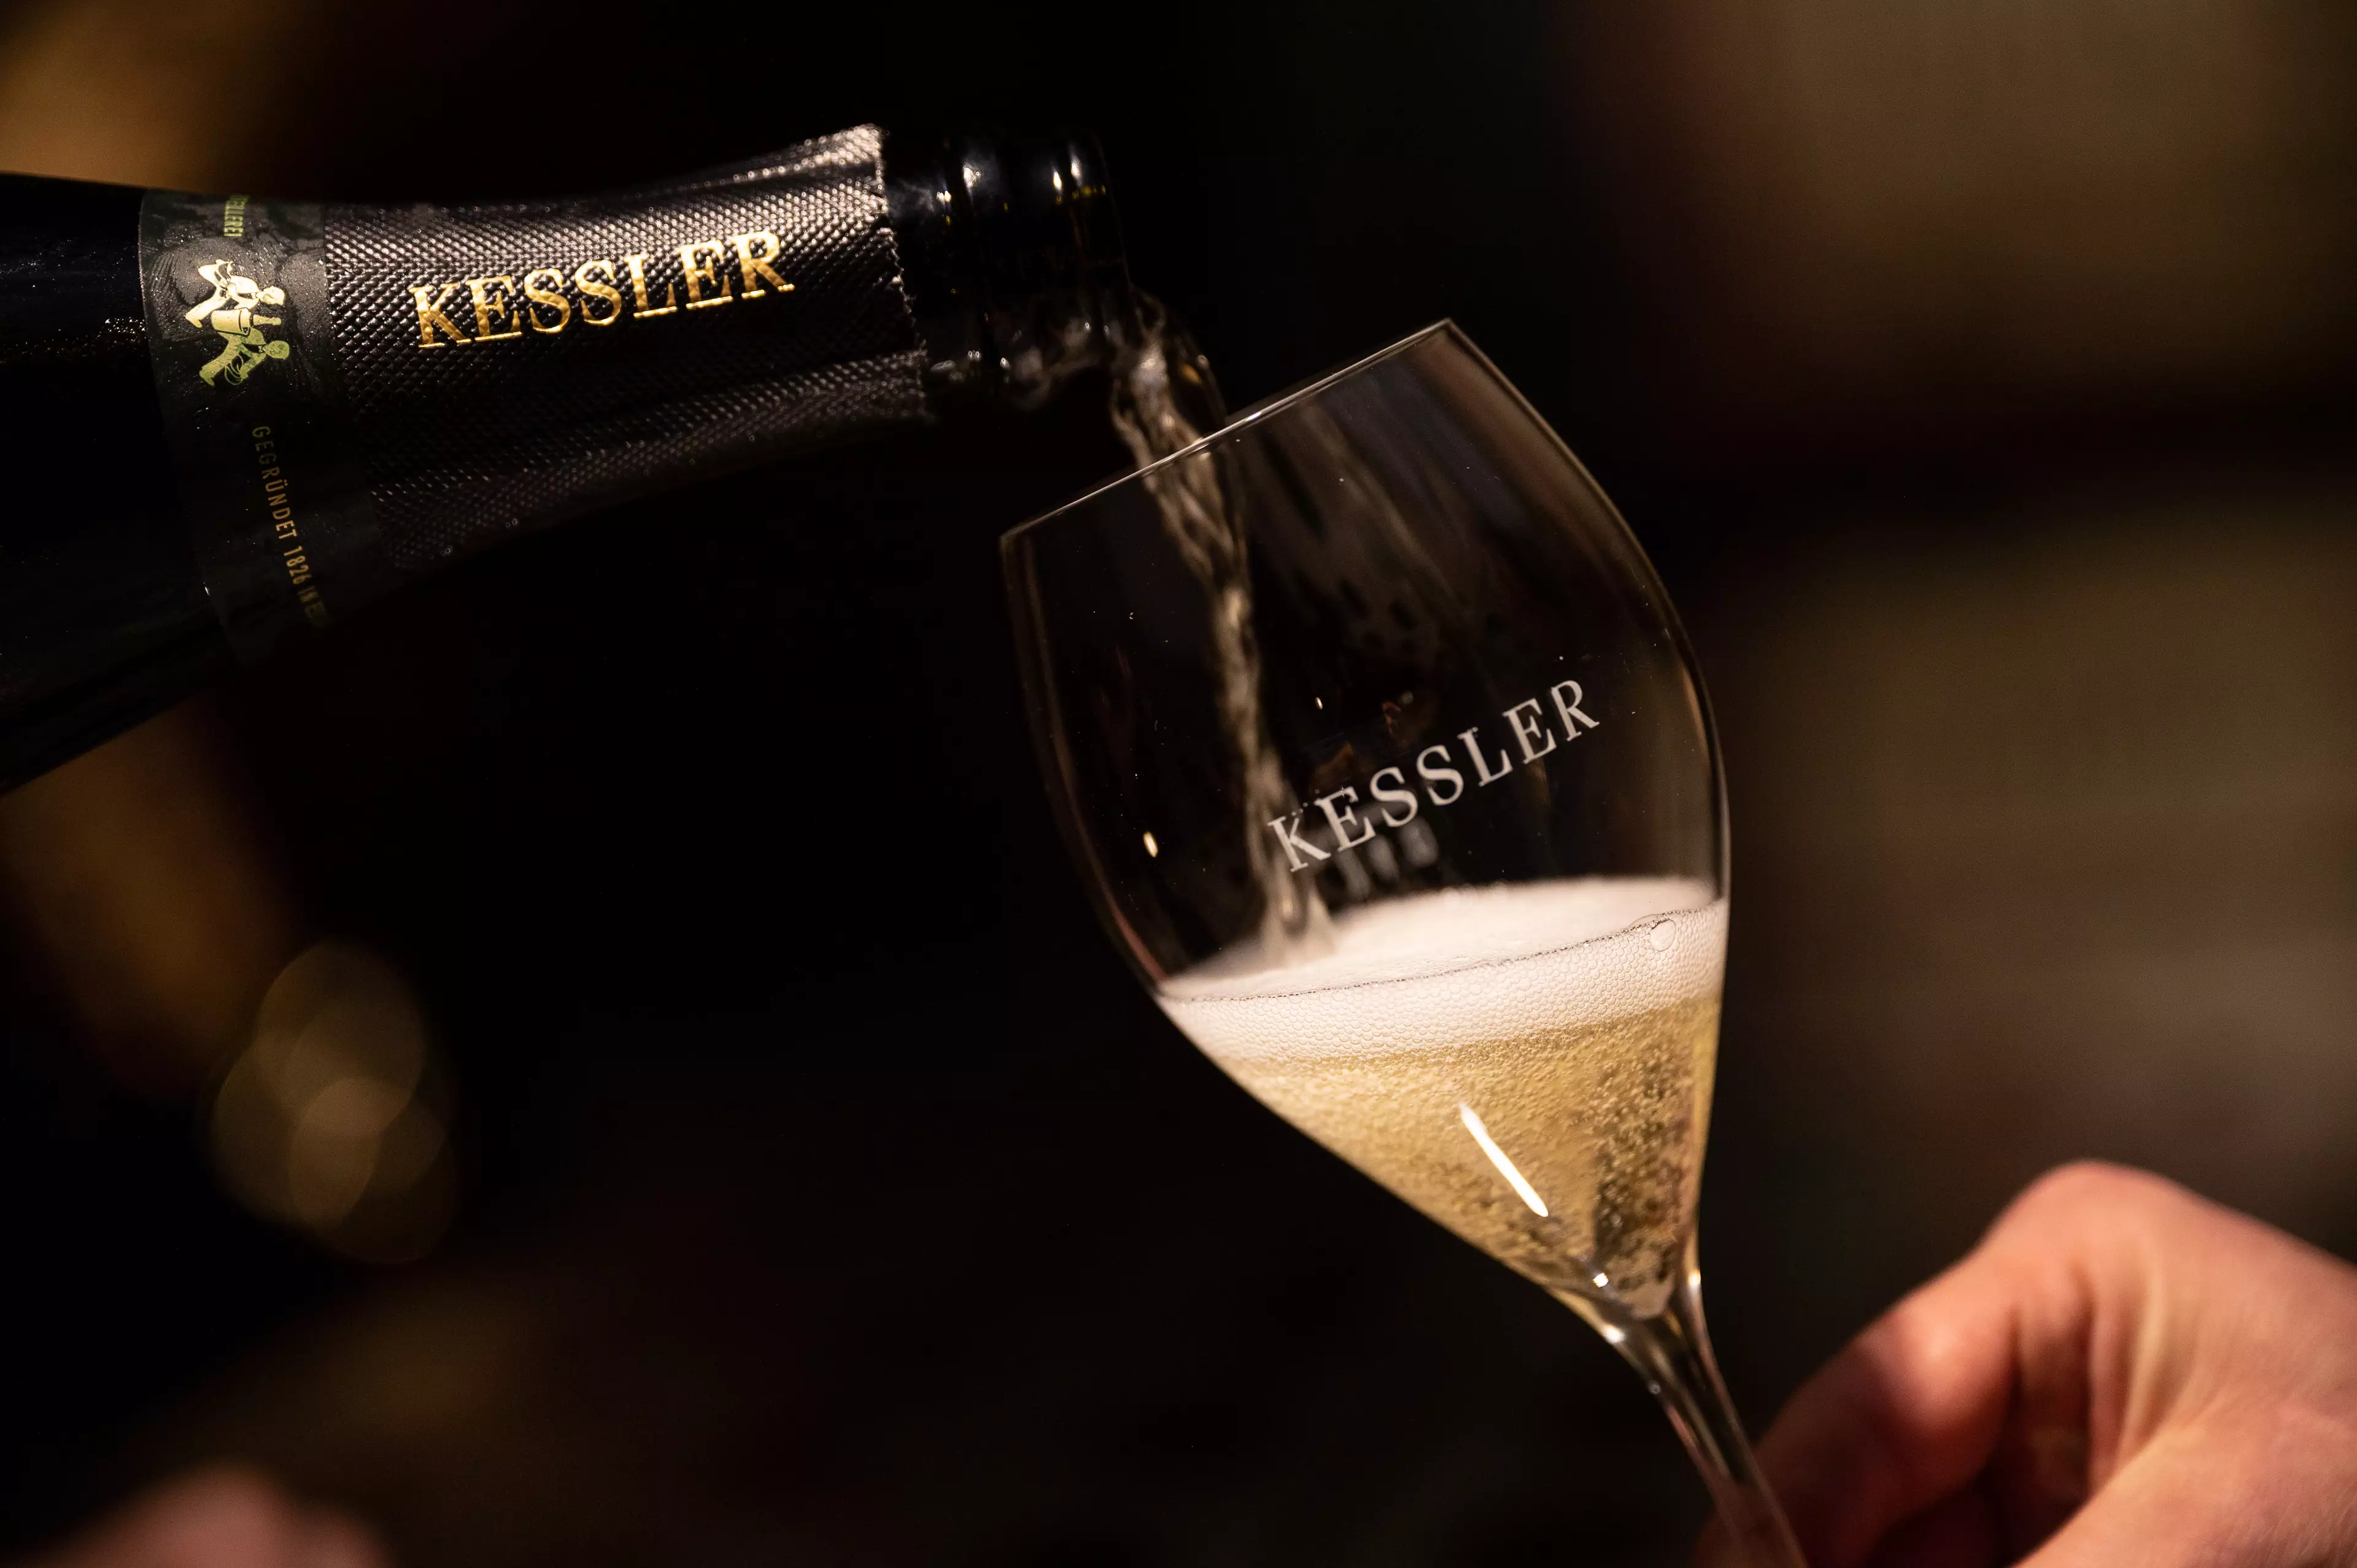 Depending on where you work, sparkling wine might not be deemed 'reasonable'.